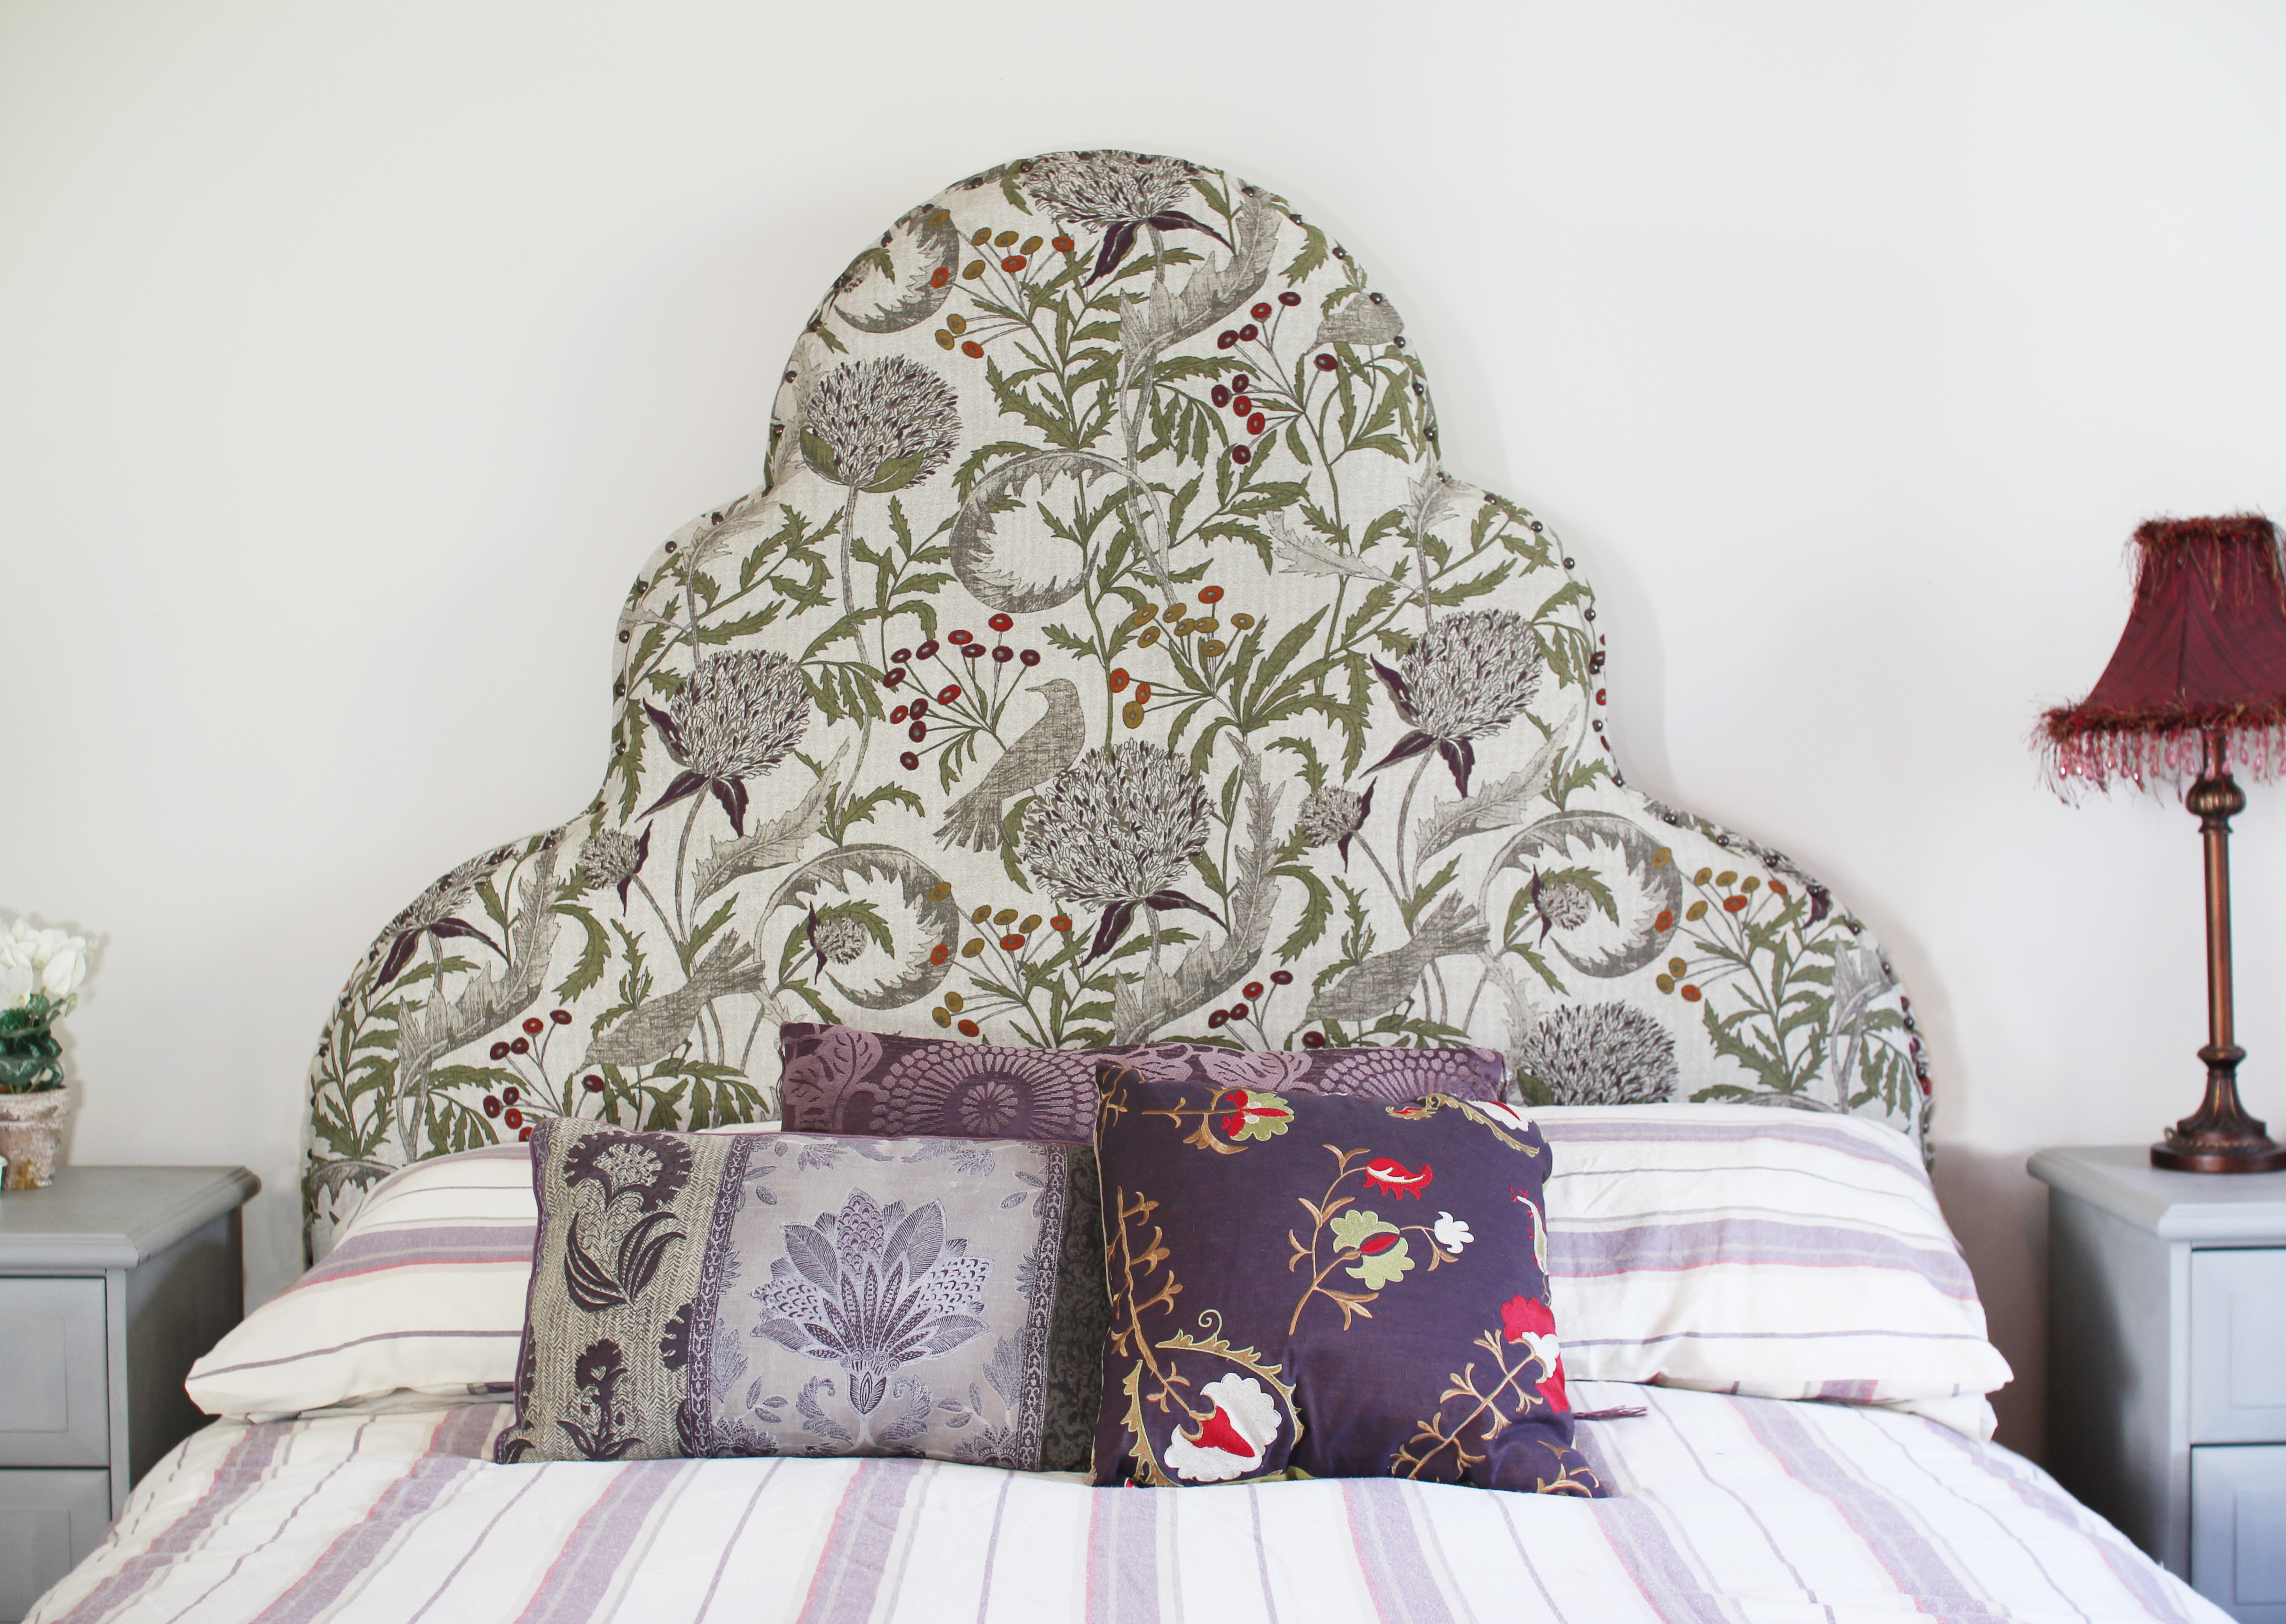 Bespoke Bedheads, made to order by Sarah Maidment Interiors, Berkhamsted, Herts